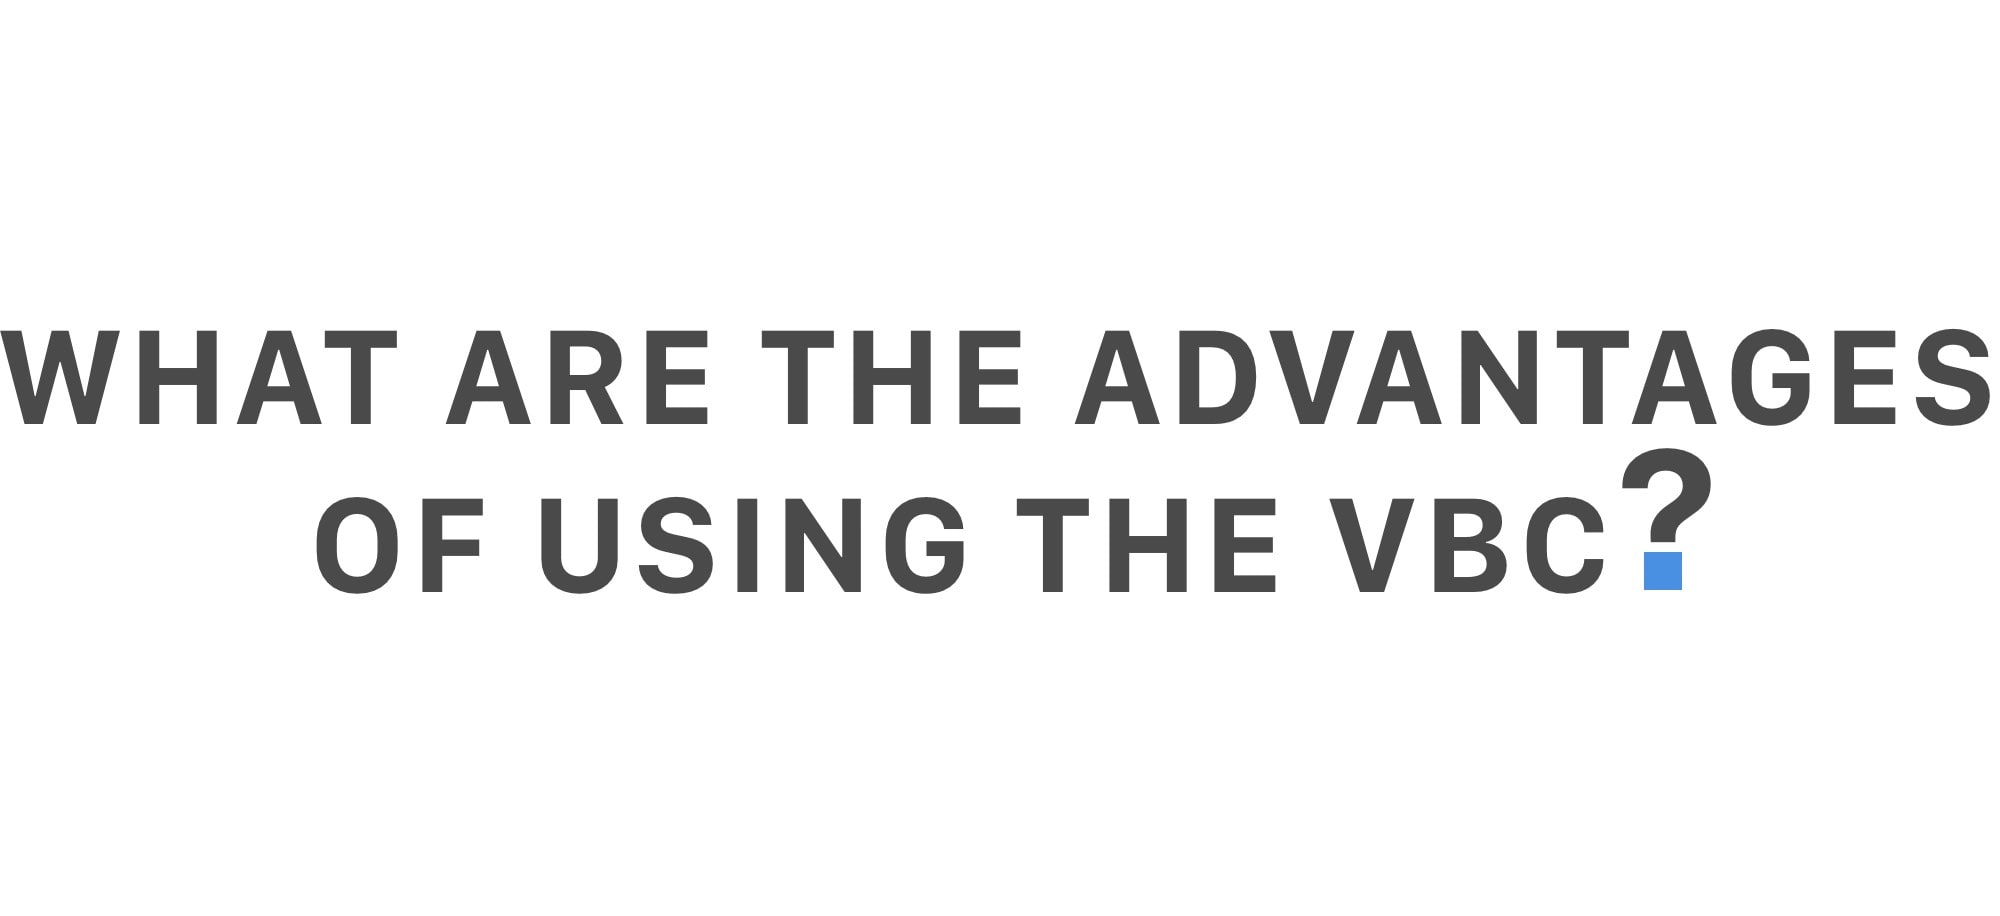 What are the advantages of using The VBC - The Virtual Business Card?